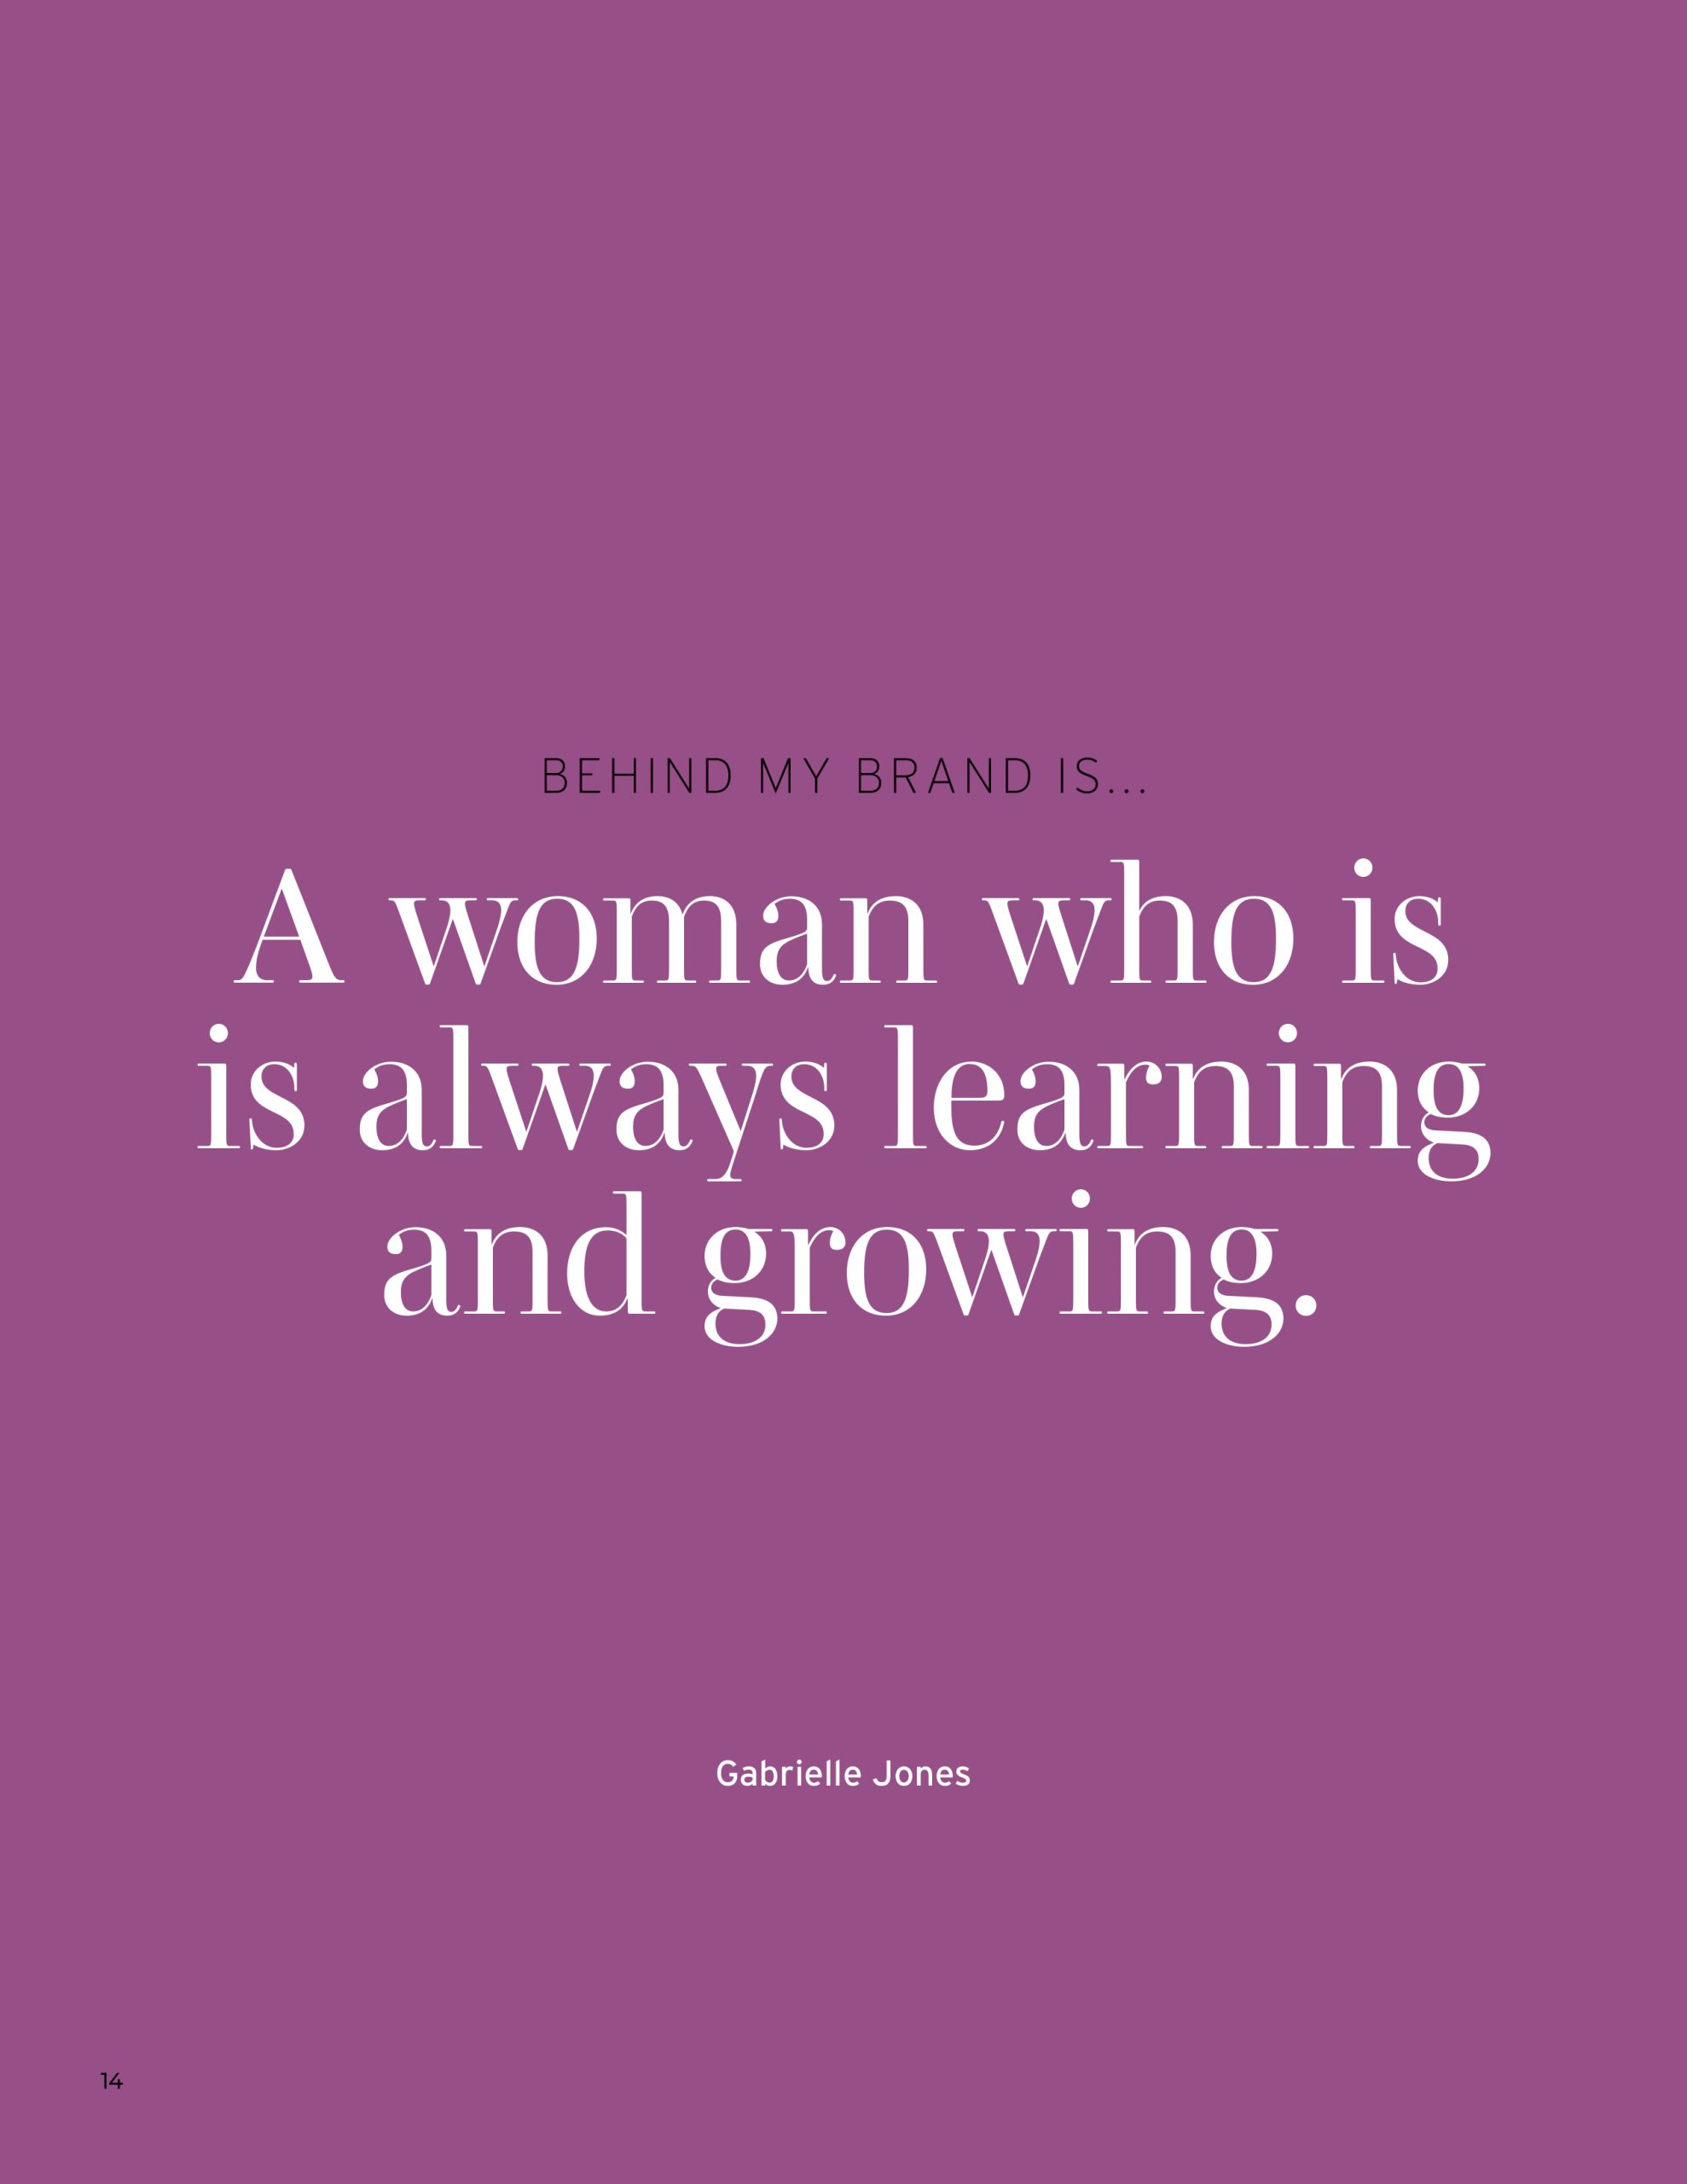 Behind my Brand is a woman who is always learning and growing.